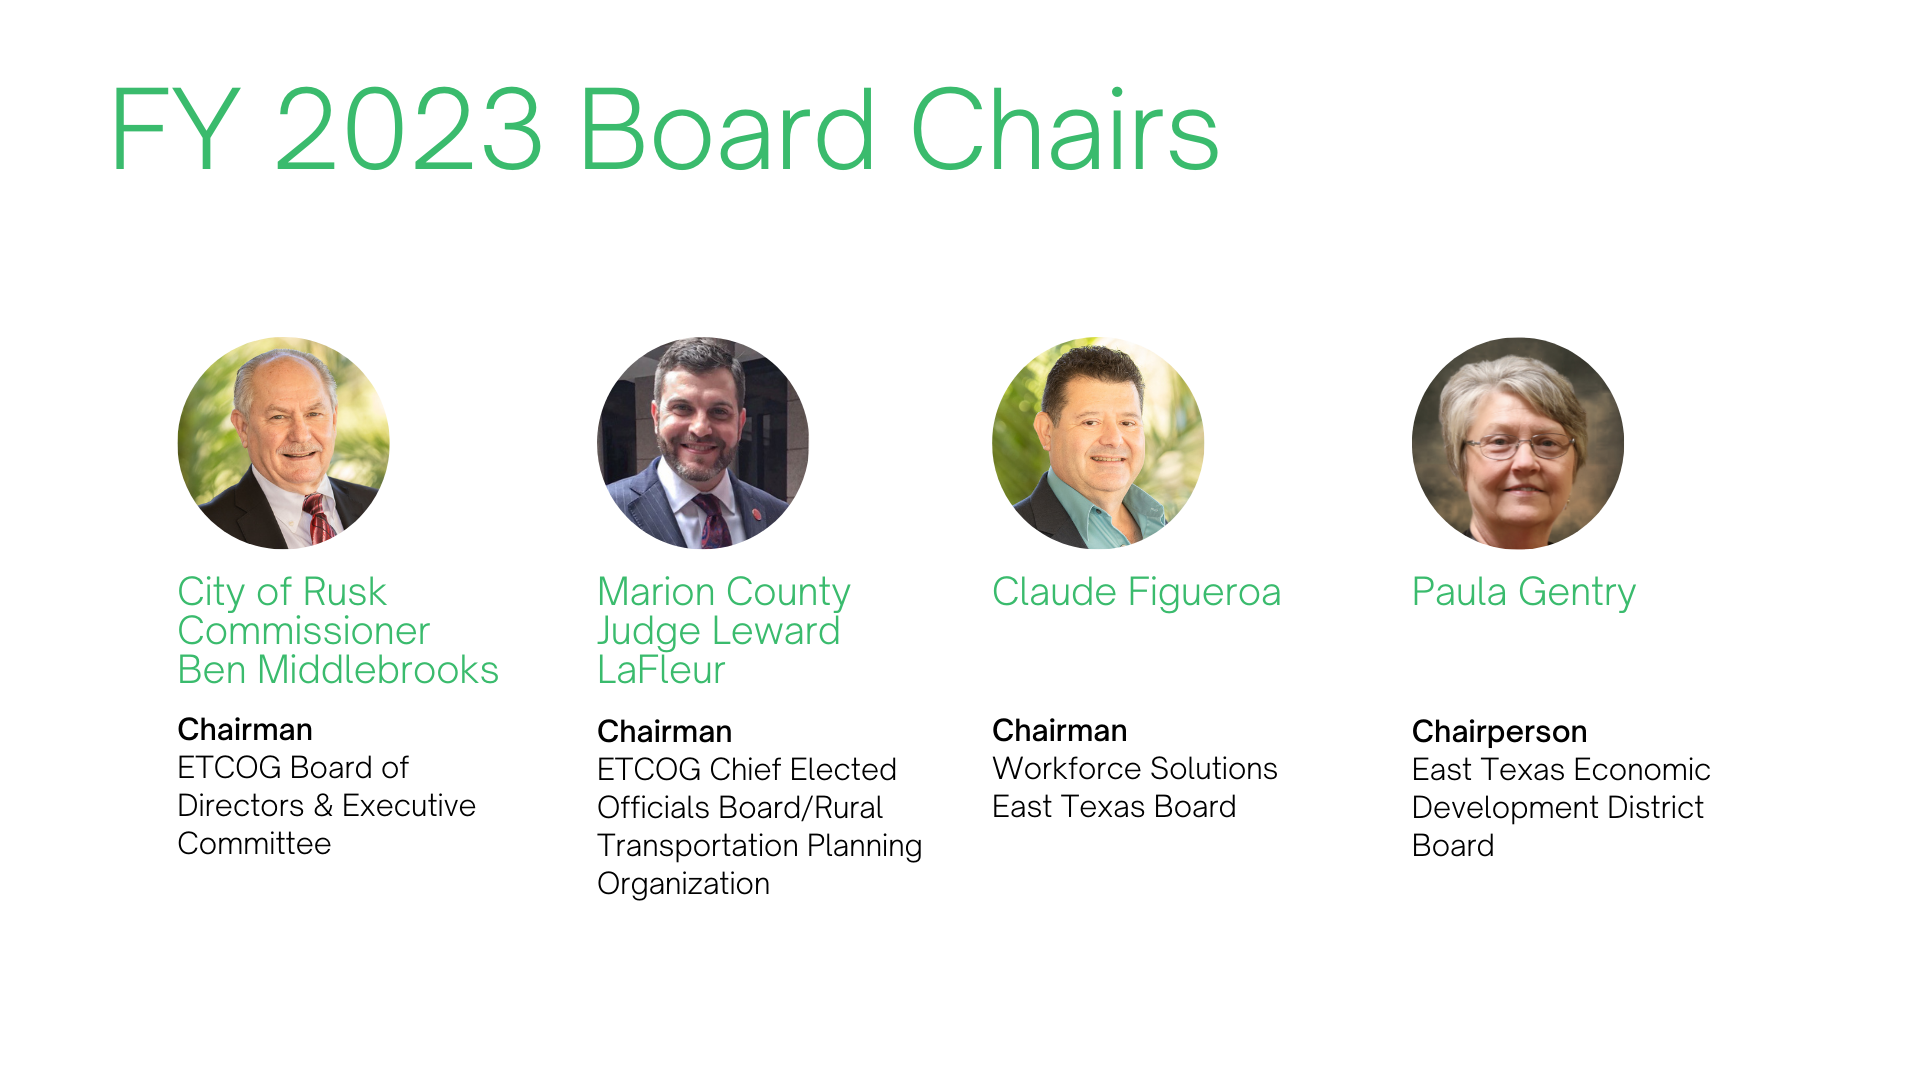 A list of board chairs for the 2023 fiscal year.